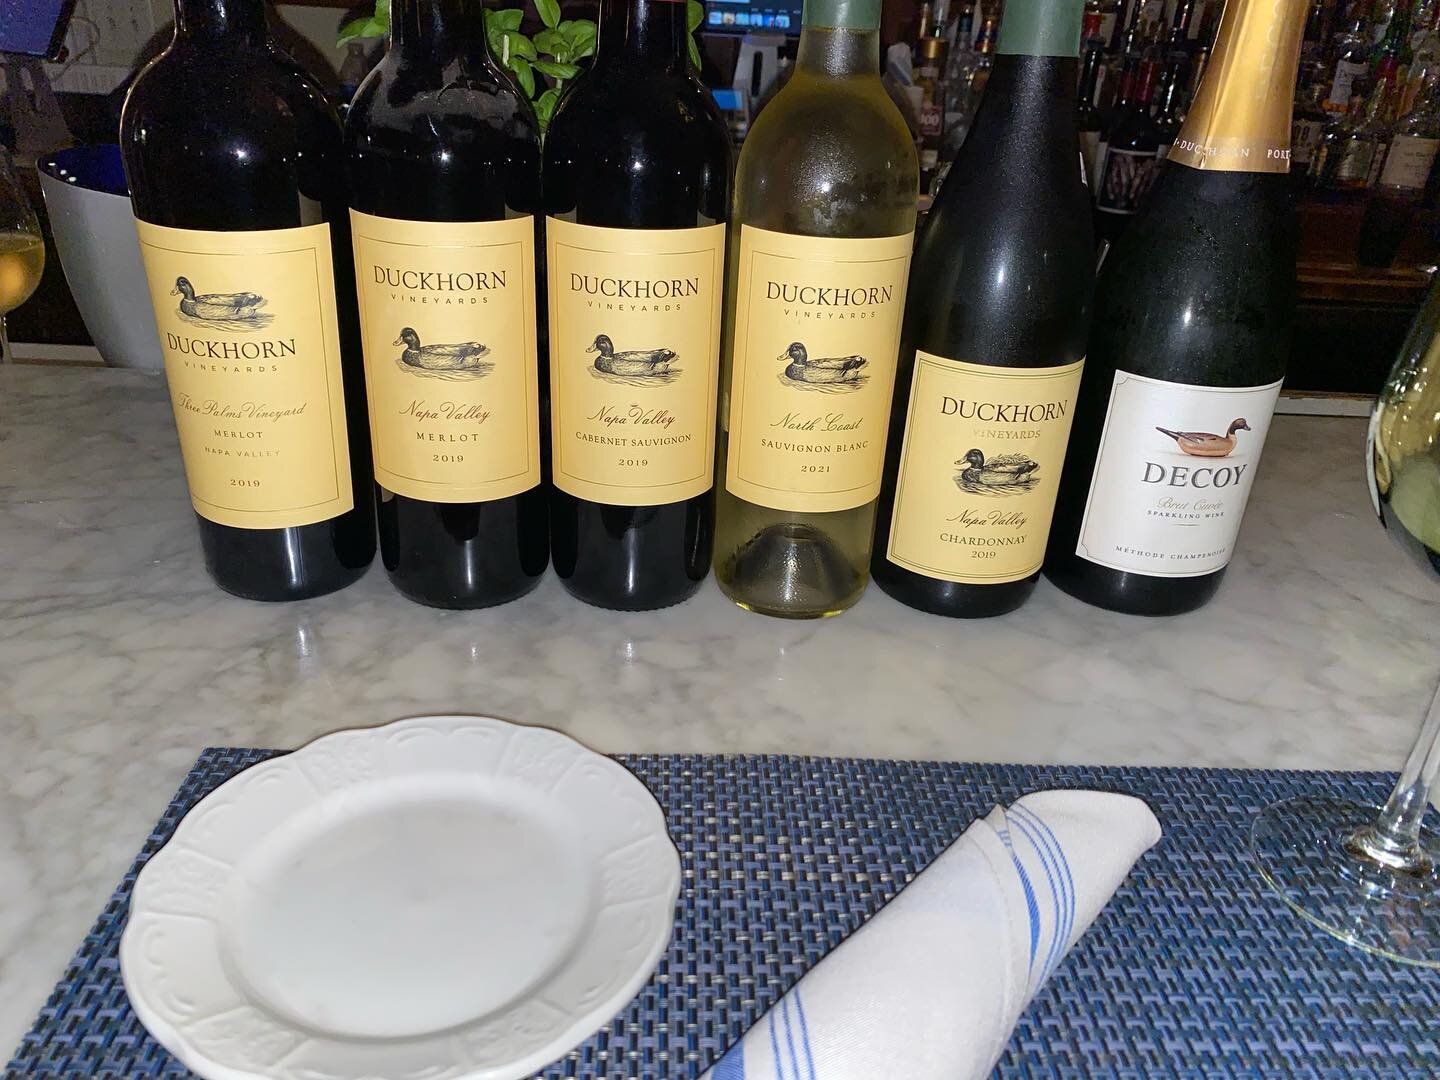 Tasting through some @duckhornwine for our Duckhorn Wine dinner on Thursday, September 22. This one is not to be missed, so call us to make your reservation today. #duckhornvineyards #thefrenchgoat #lewisburgwv #bonappalachia #simplygbv 
#bistrolife